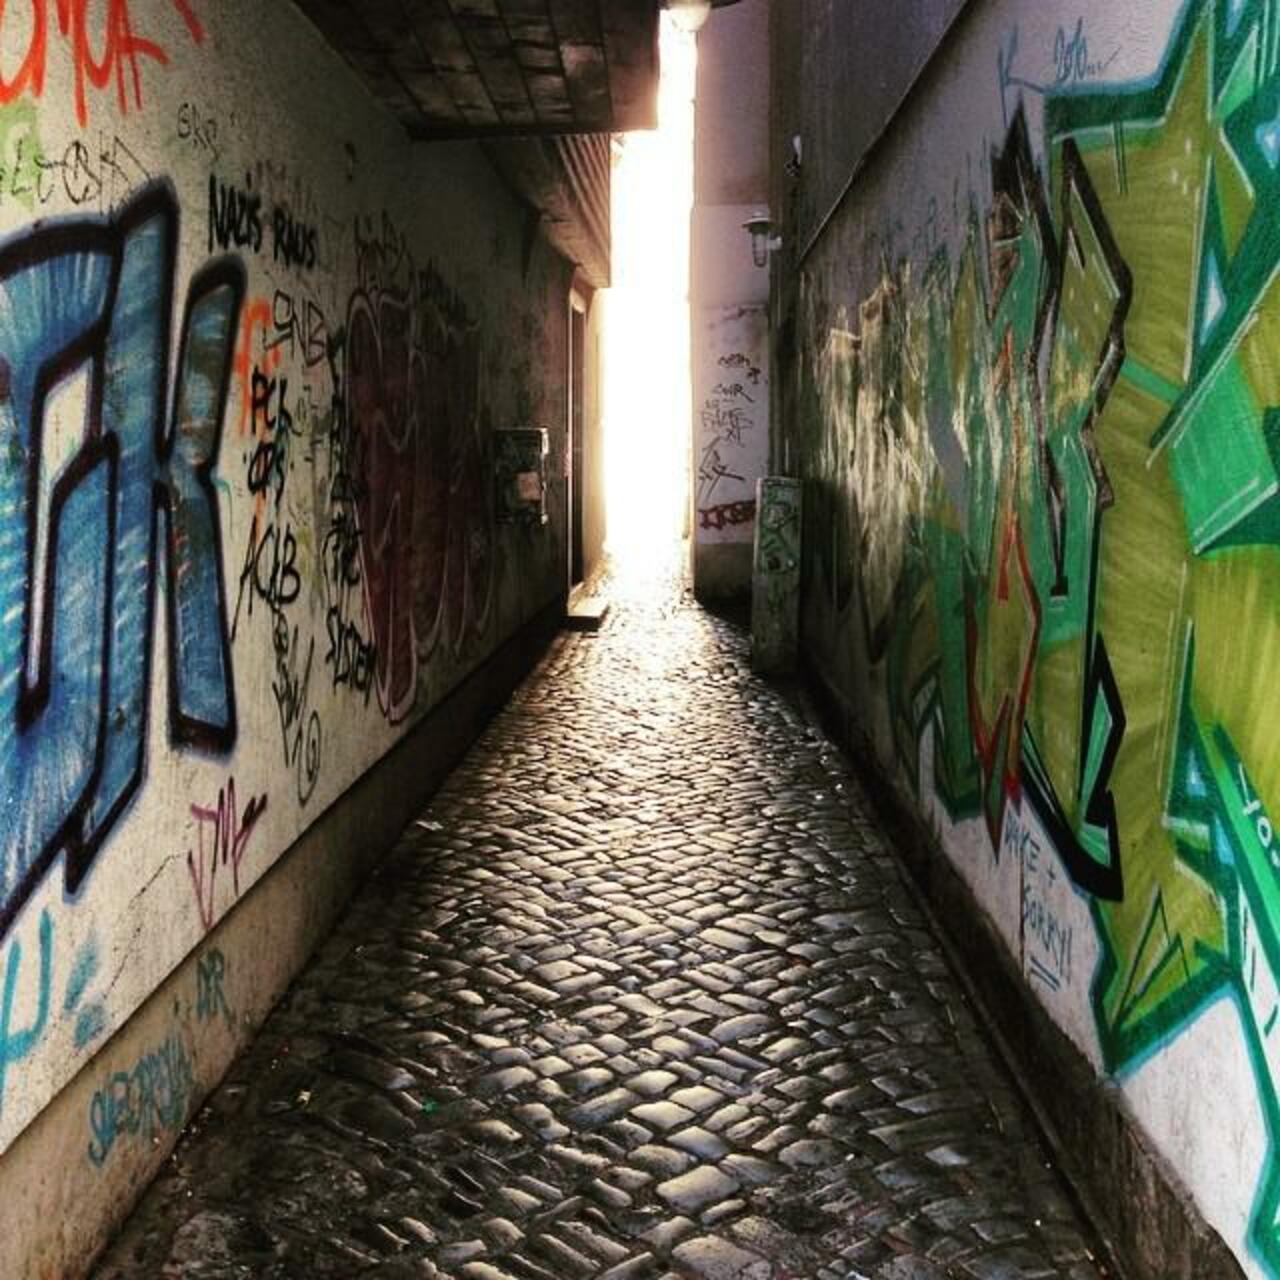 #Cobbles & #graffiti in #Erfurt today. #art #history #culture #perspective #design #old #new #travel #tourism #tour… http://t.co/8TnlwQQBzJ